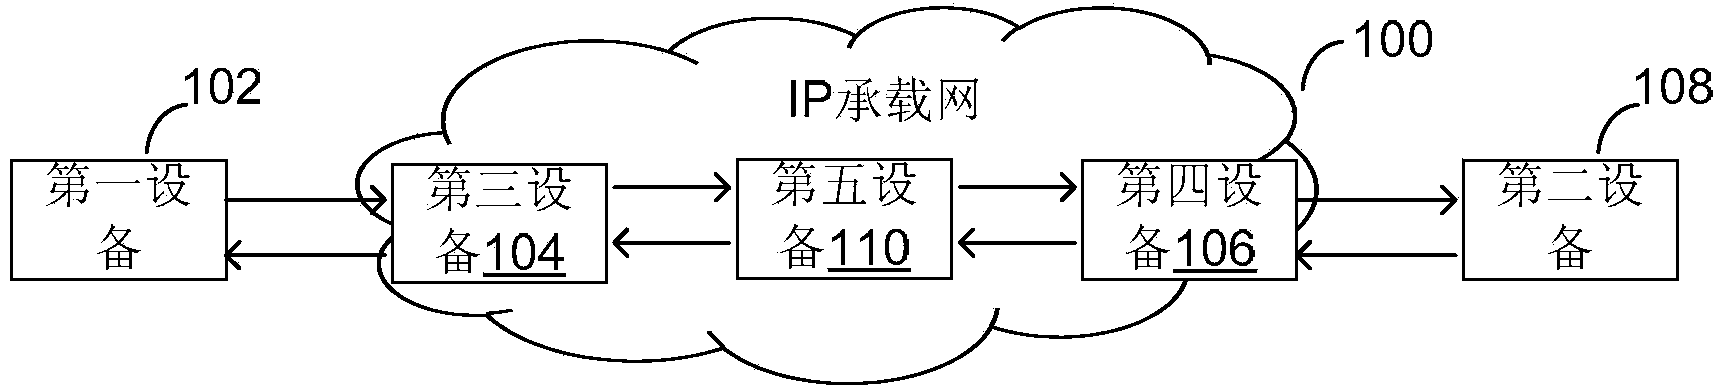 Method and system for confirming faults of IP bearer network